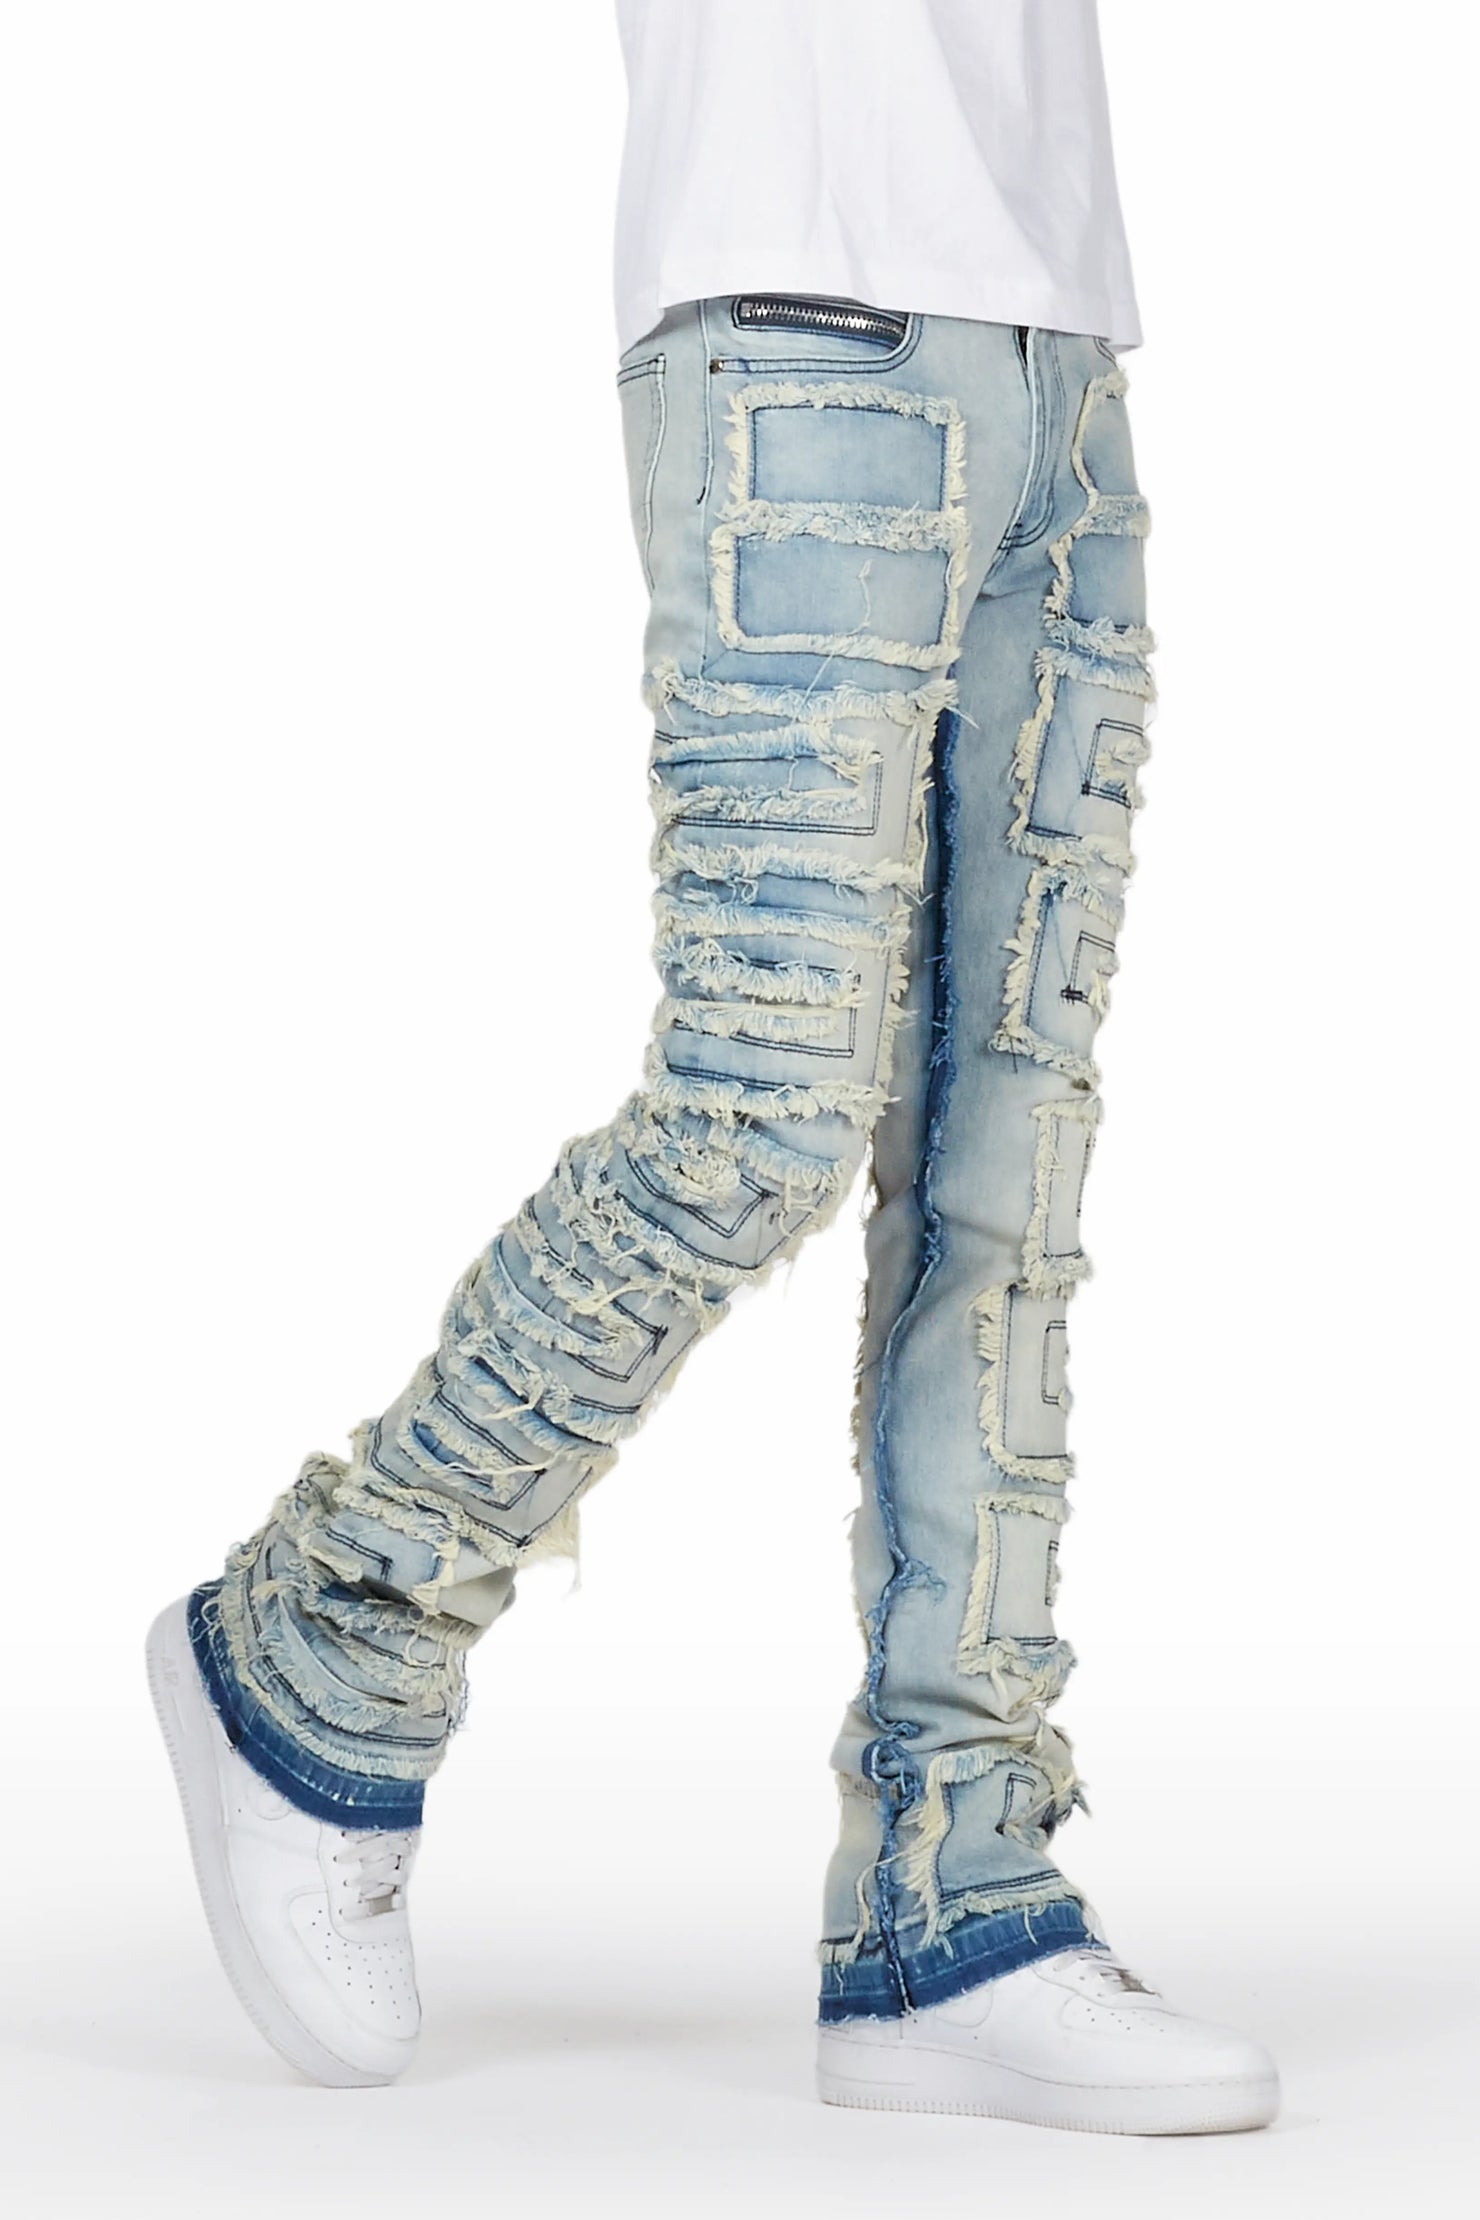 Wayland Blue Stacked Flare Jean